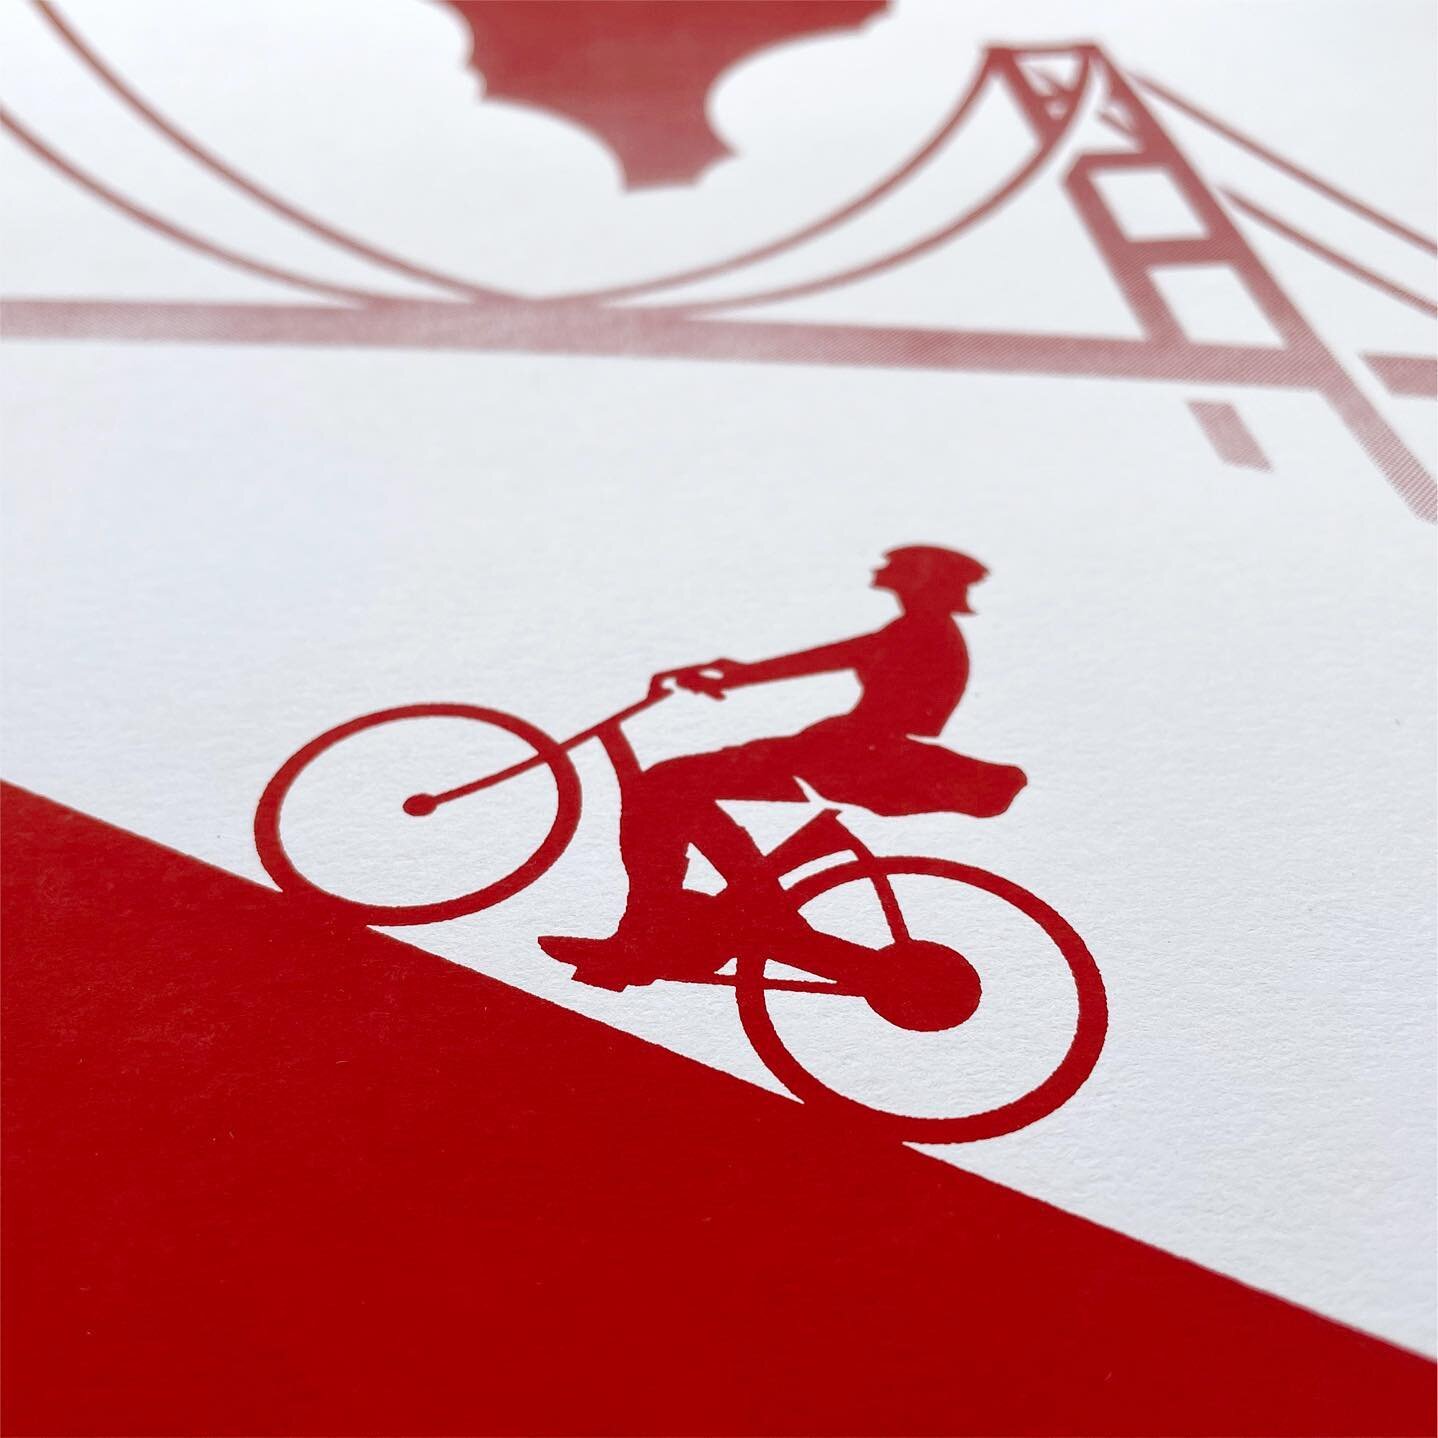 TBT to some posters and shirts I designed for The New Wheel, an electric bike company here in town. I still have a few screen prints left if anyone wants one.

They were created as part of a rebranding effort and store launch on Bernal Hill. The post